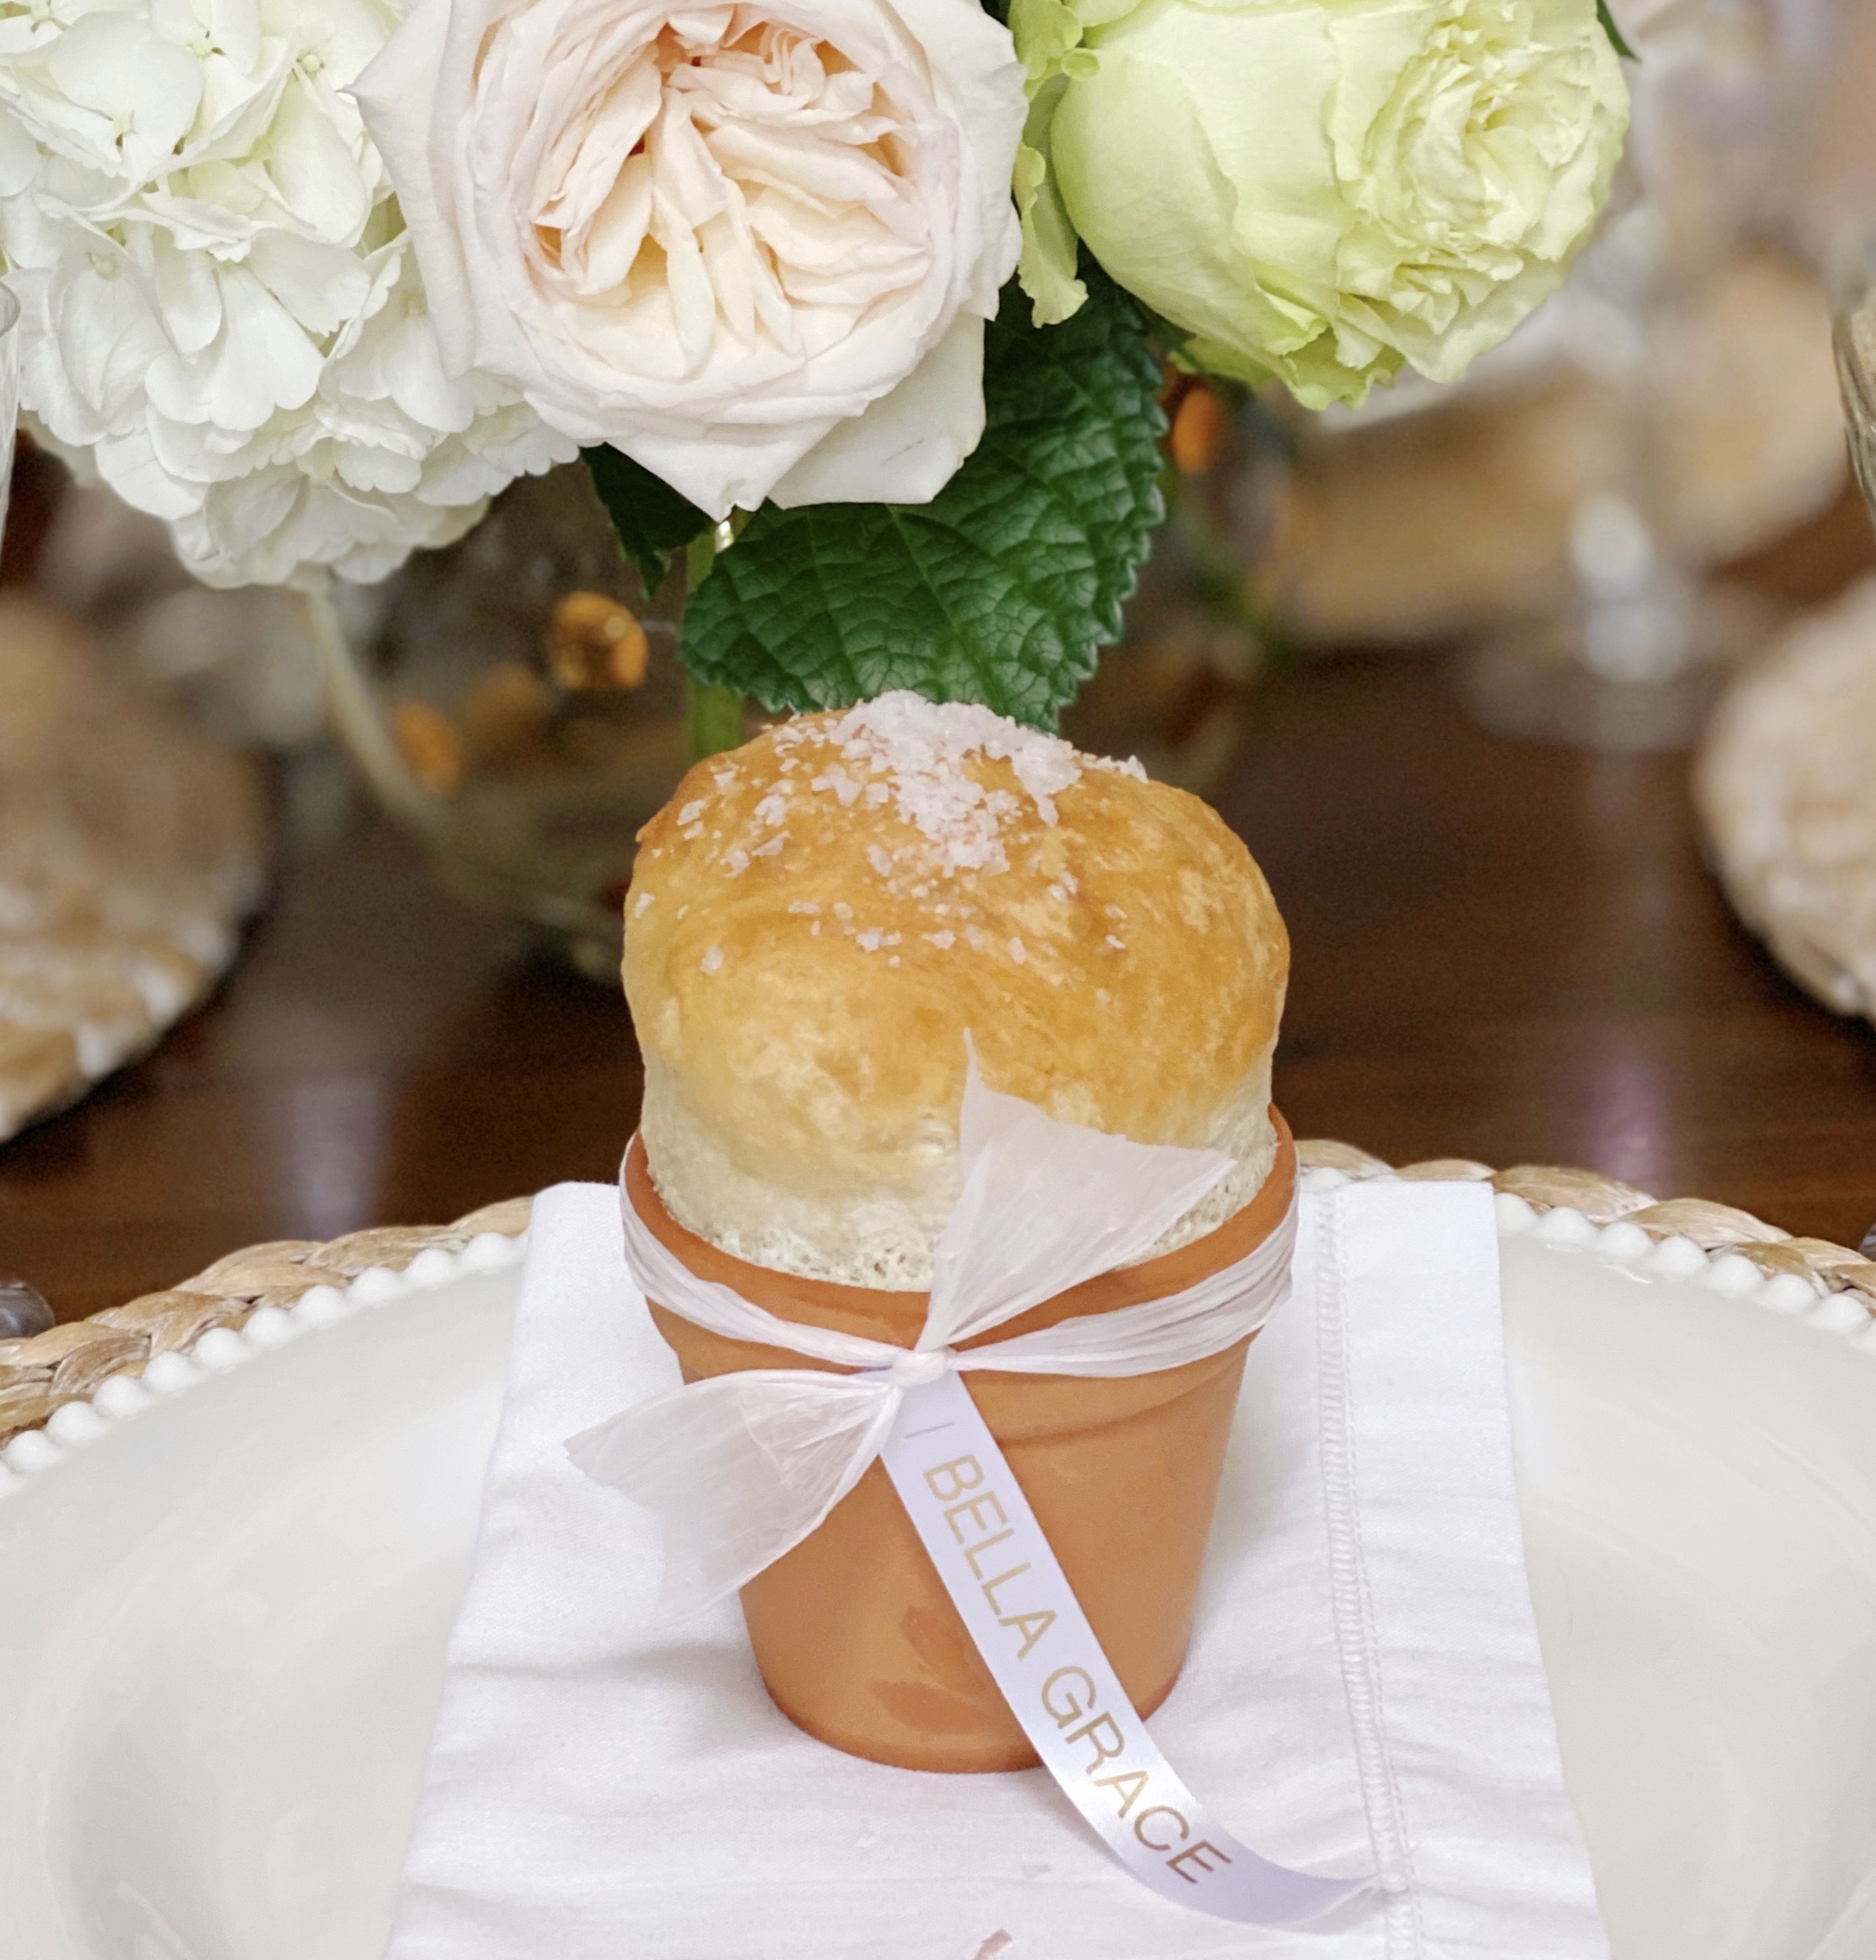 How To Create A Charming Personalized Place Setting With Flower Pot Bread